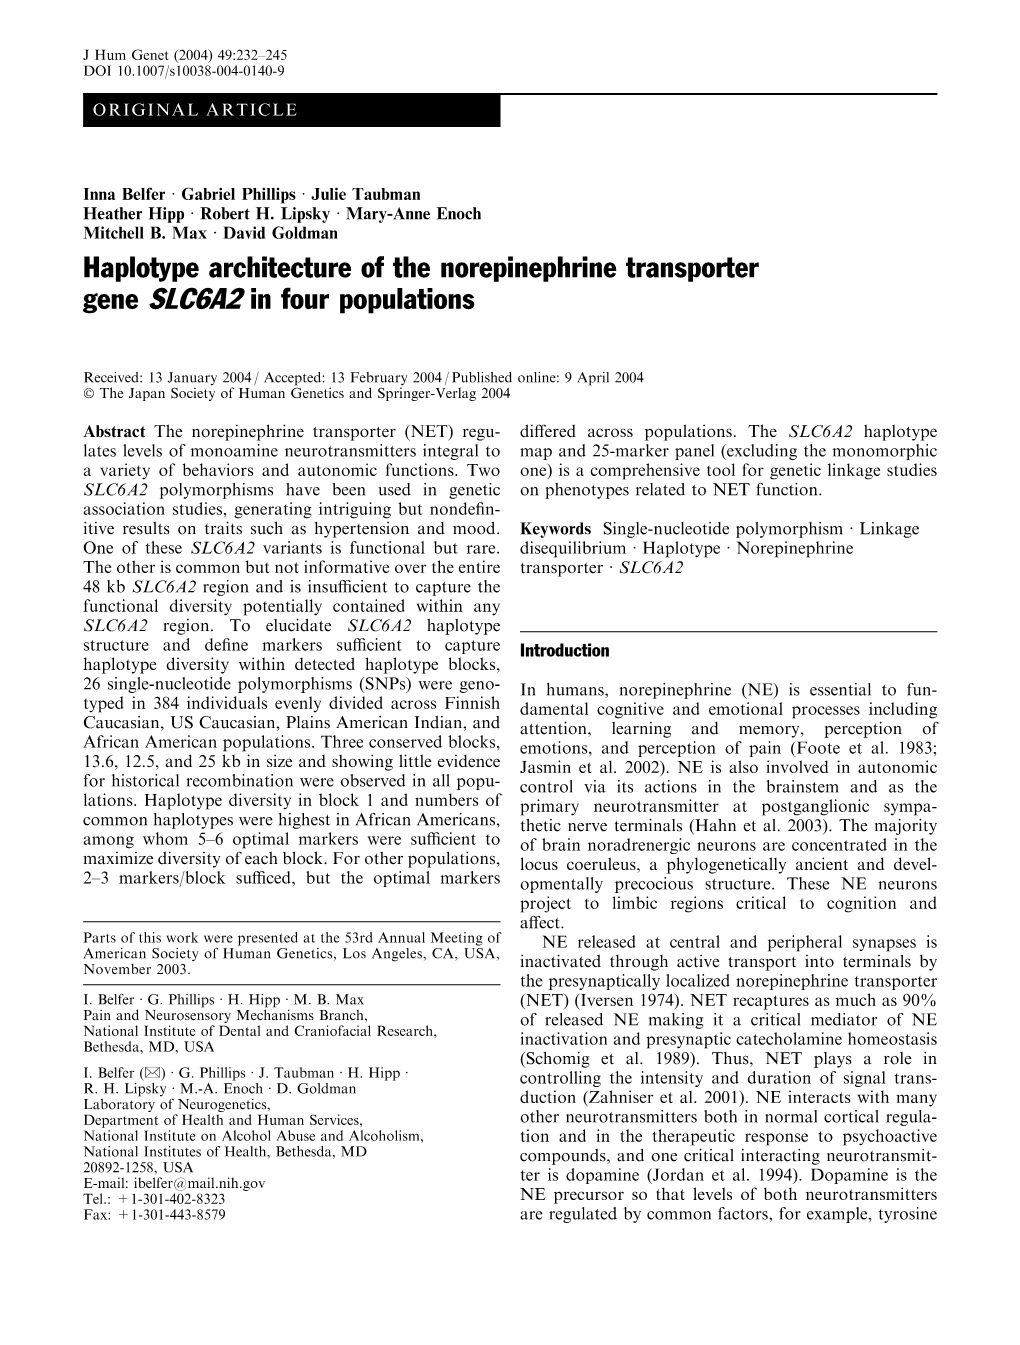 Haplotype Architecture of the Norepinephrine Transporter Gene SLC6A2 in Four Populations